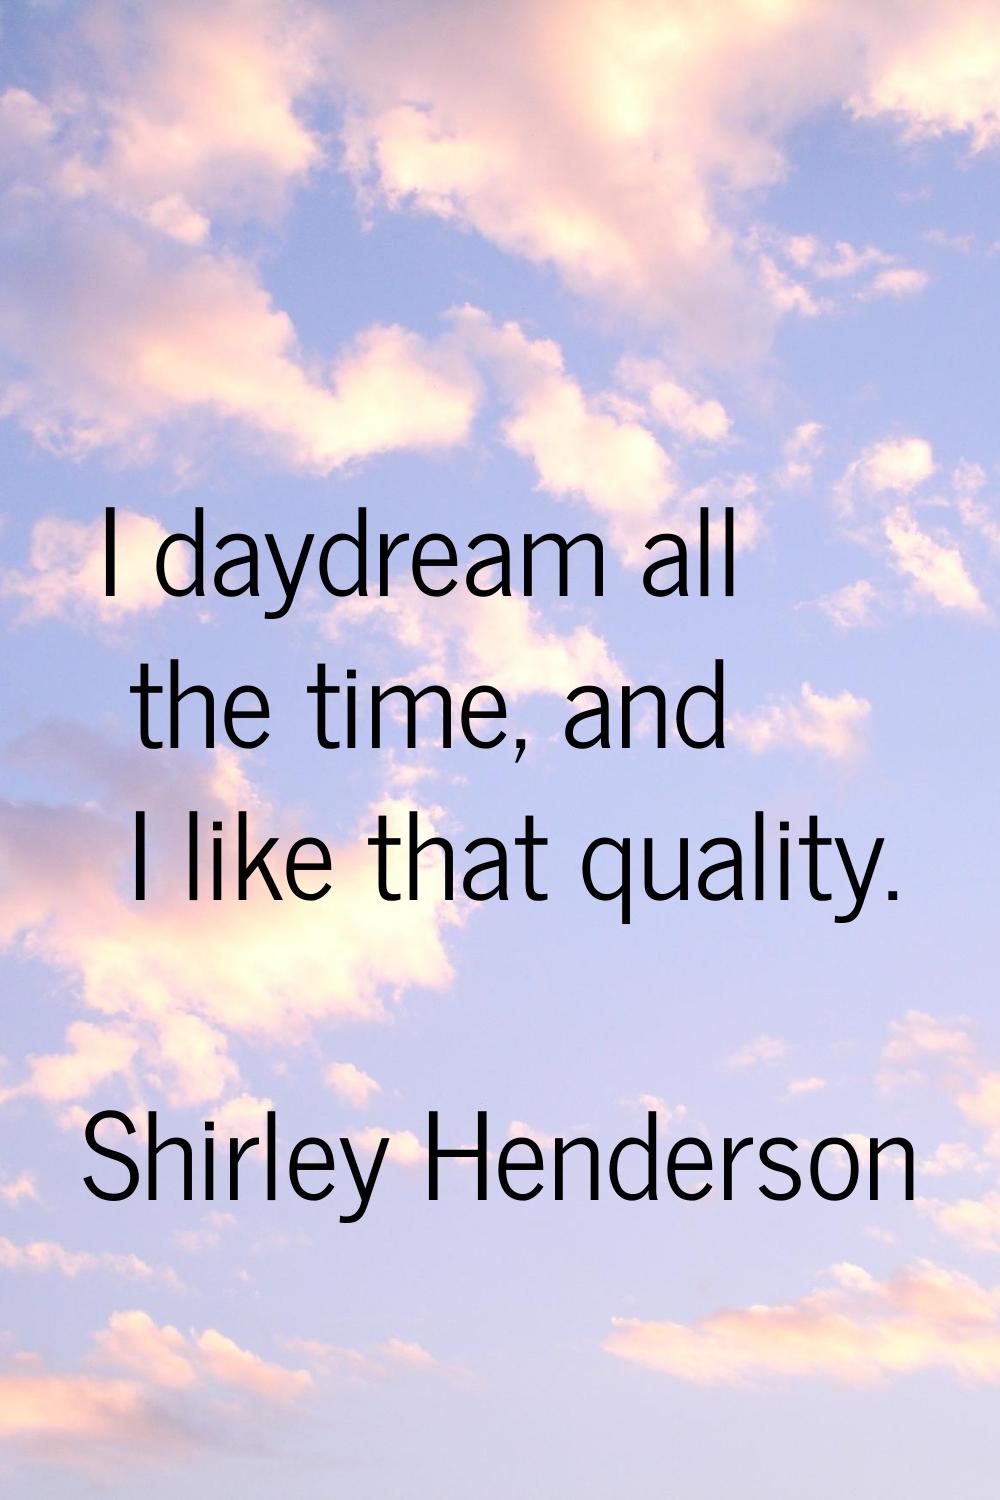 I daydream all the time, and I like that quality.